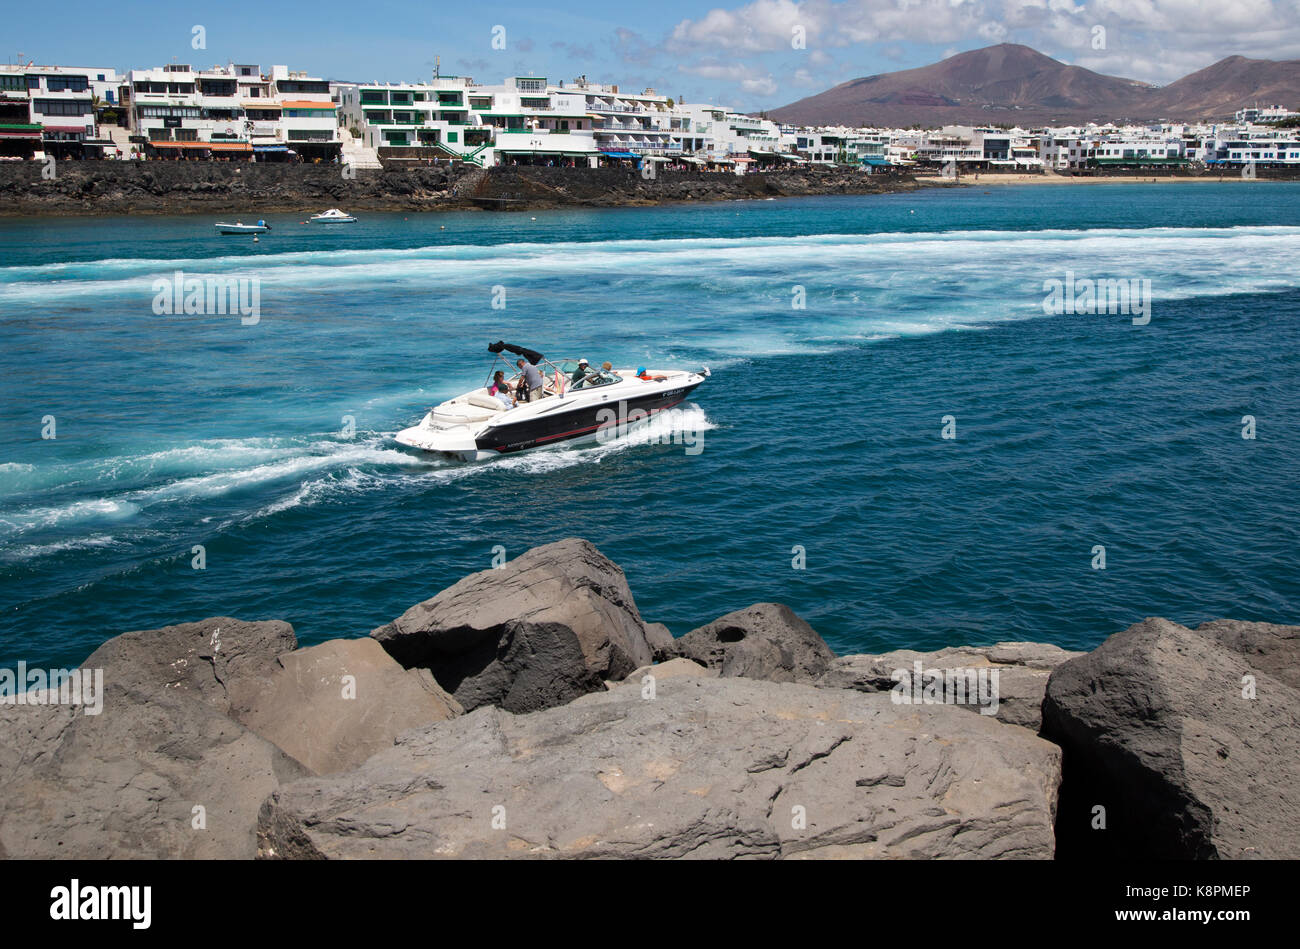 Motor boat leaving harbour at Playa Blanca, Lanzarote, Canary Islands, Spain Stock Photo